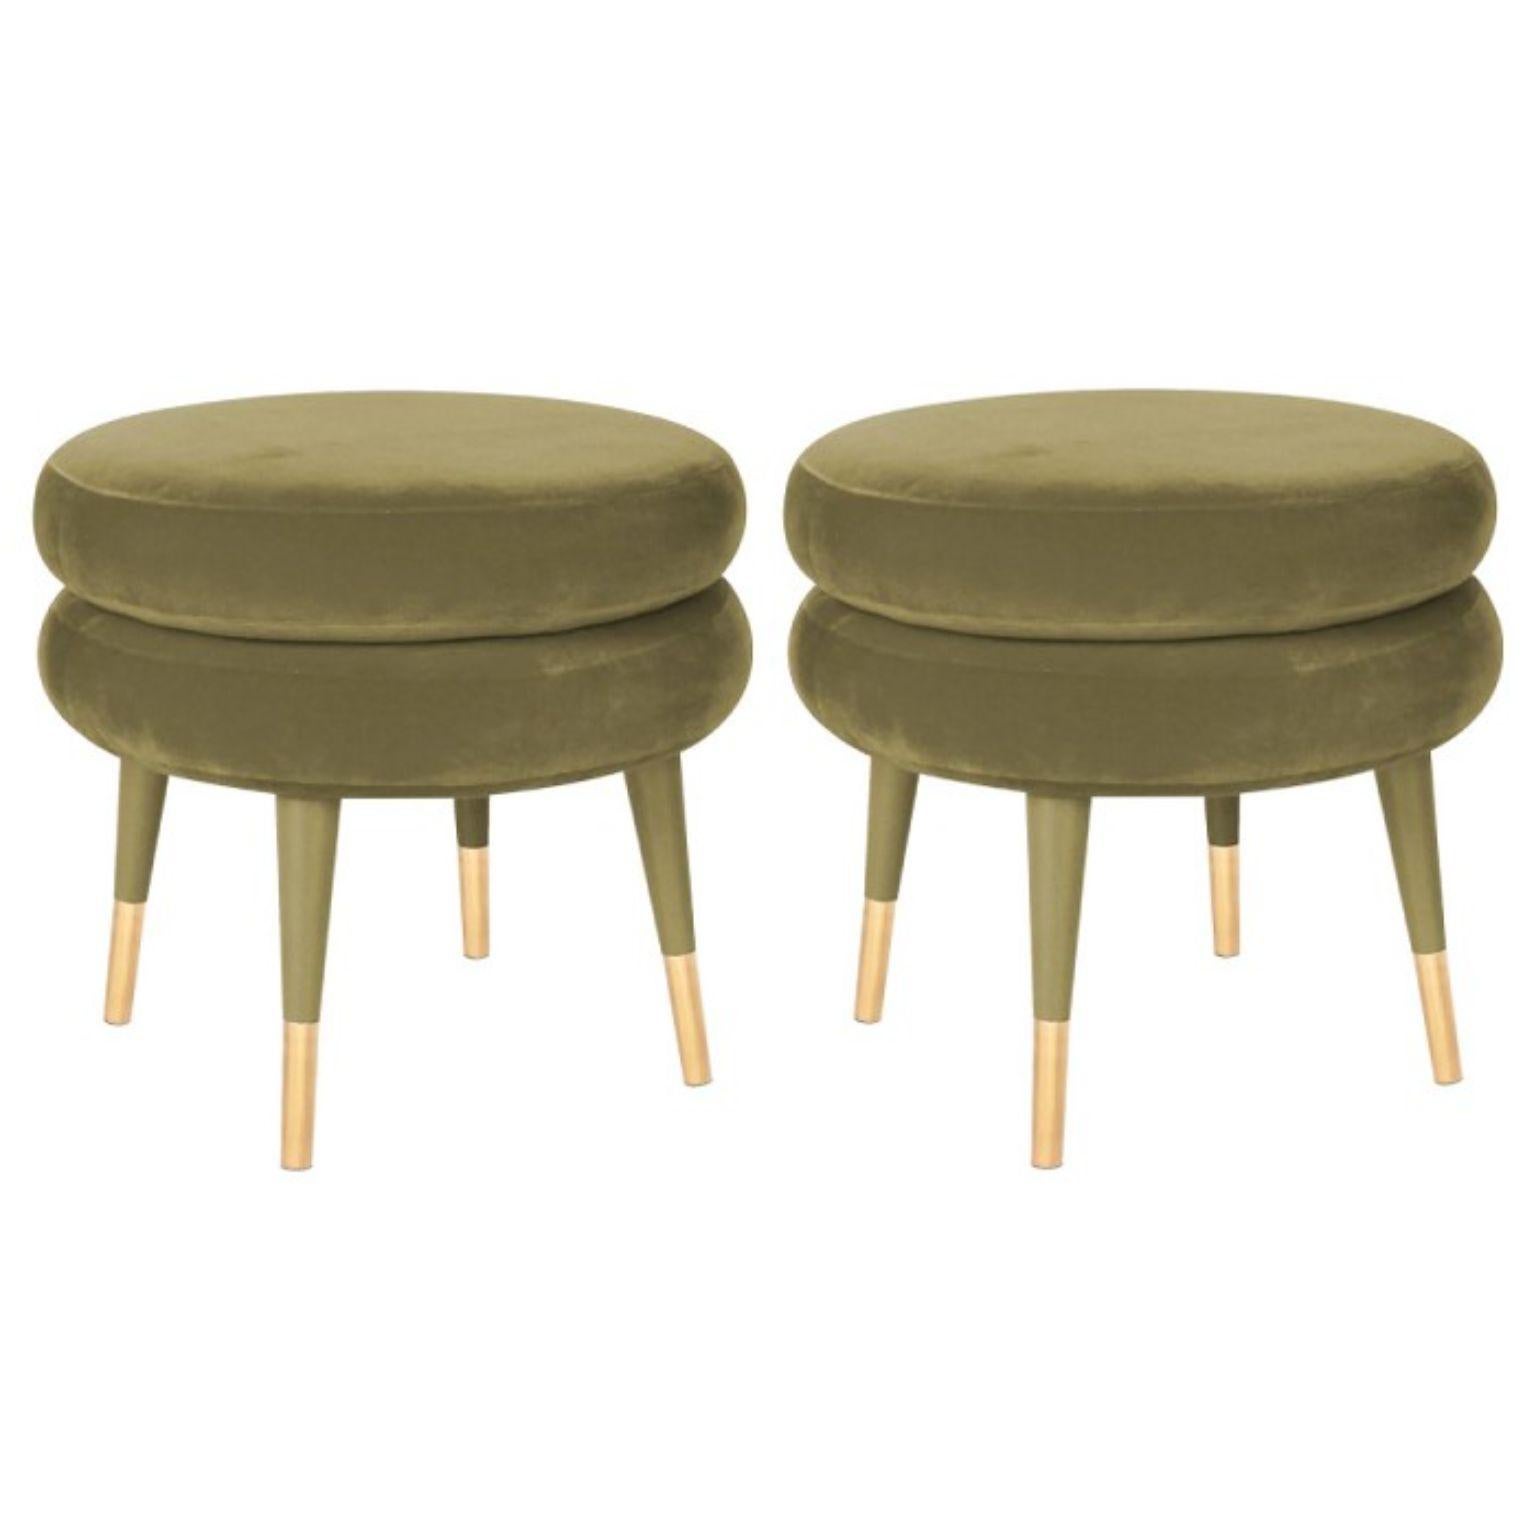 Set of 2 marshmallow stools, Royal Stranger.
Dimensions: 45 x 50 x 50 cm.
Materials: Velvet upholstery, brass
Available in: Mint green, light pink, royal green, and royal red.

Royal Stranger is an exclusive furniture brand determined to bring